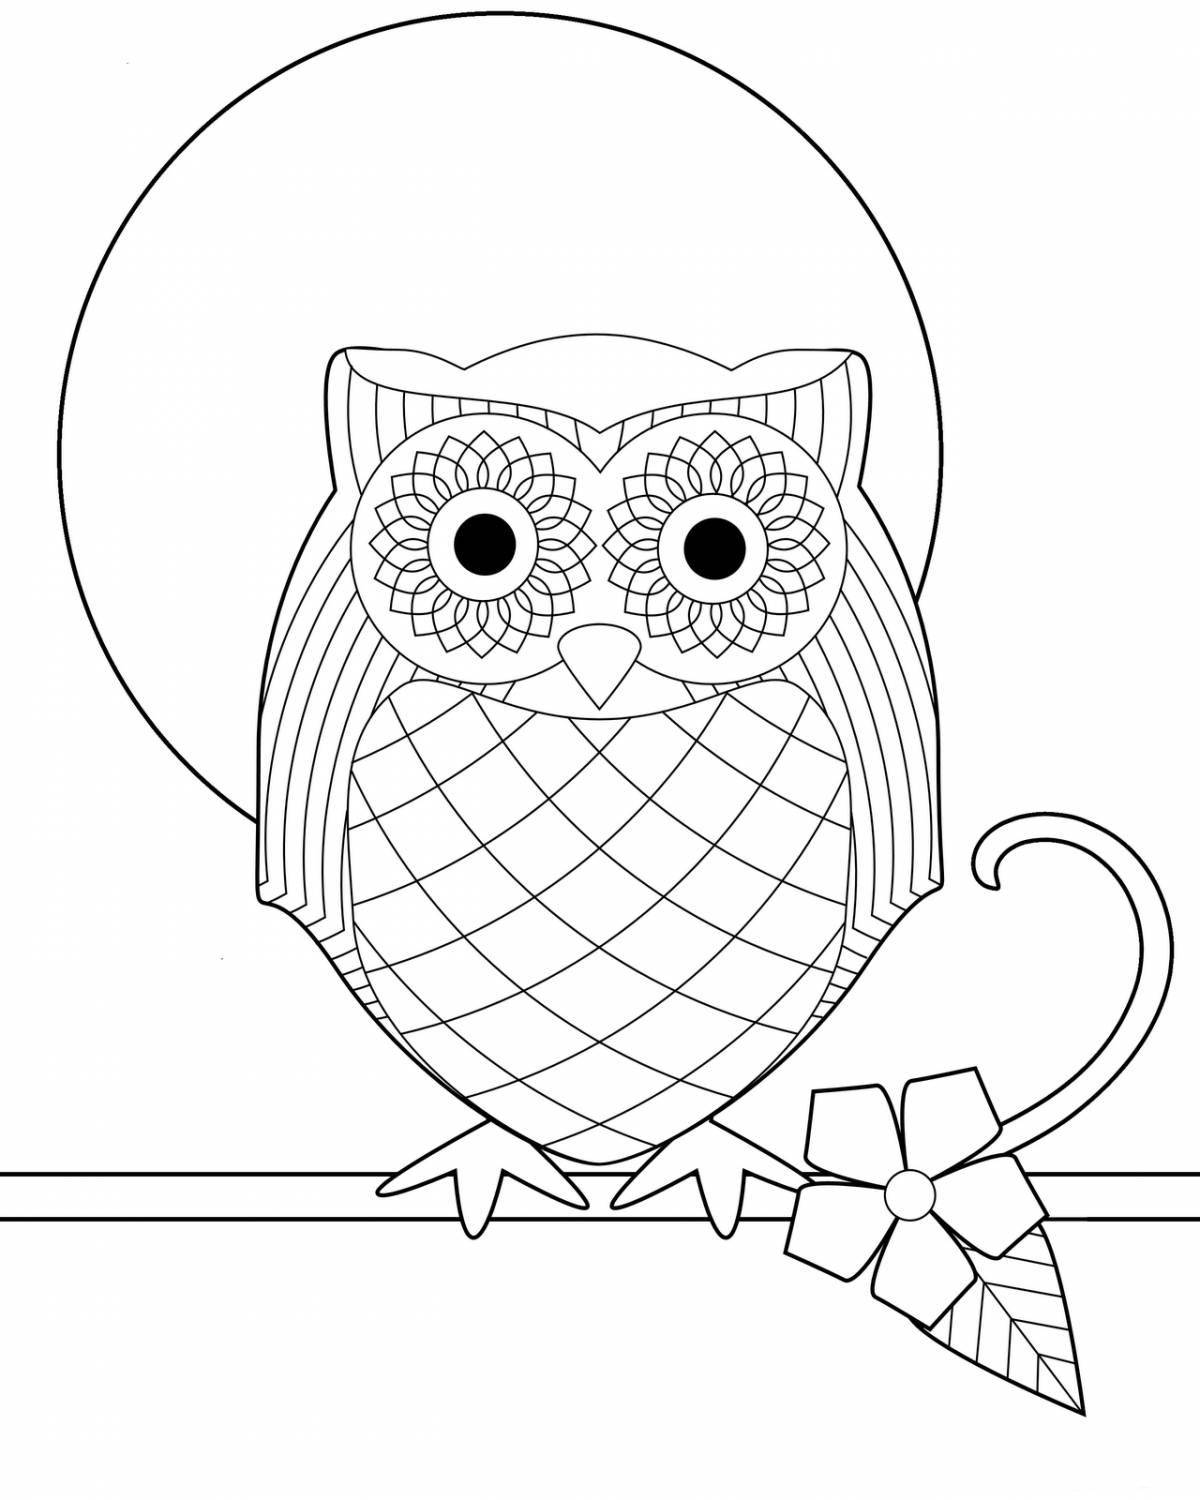 Whimsical owl coloring book for 6-7 year olds